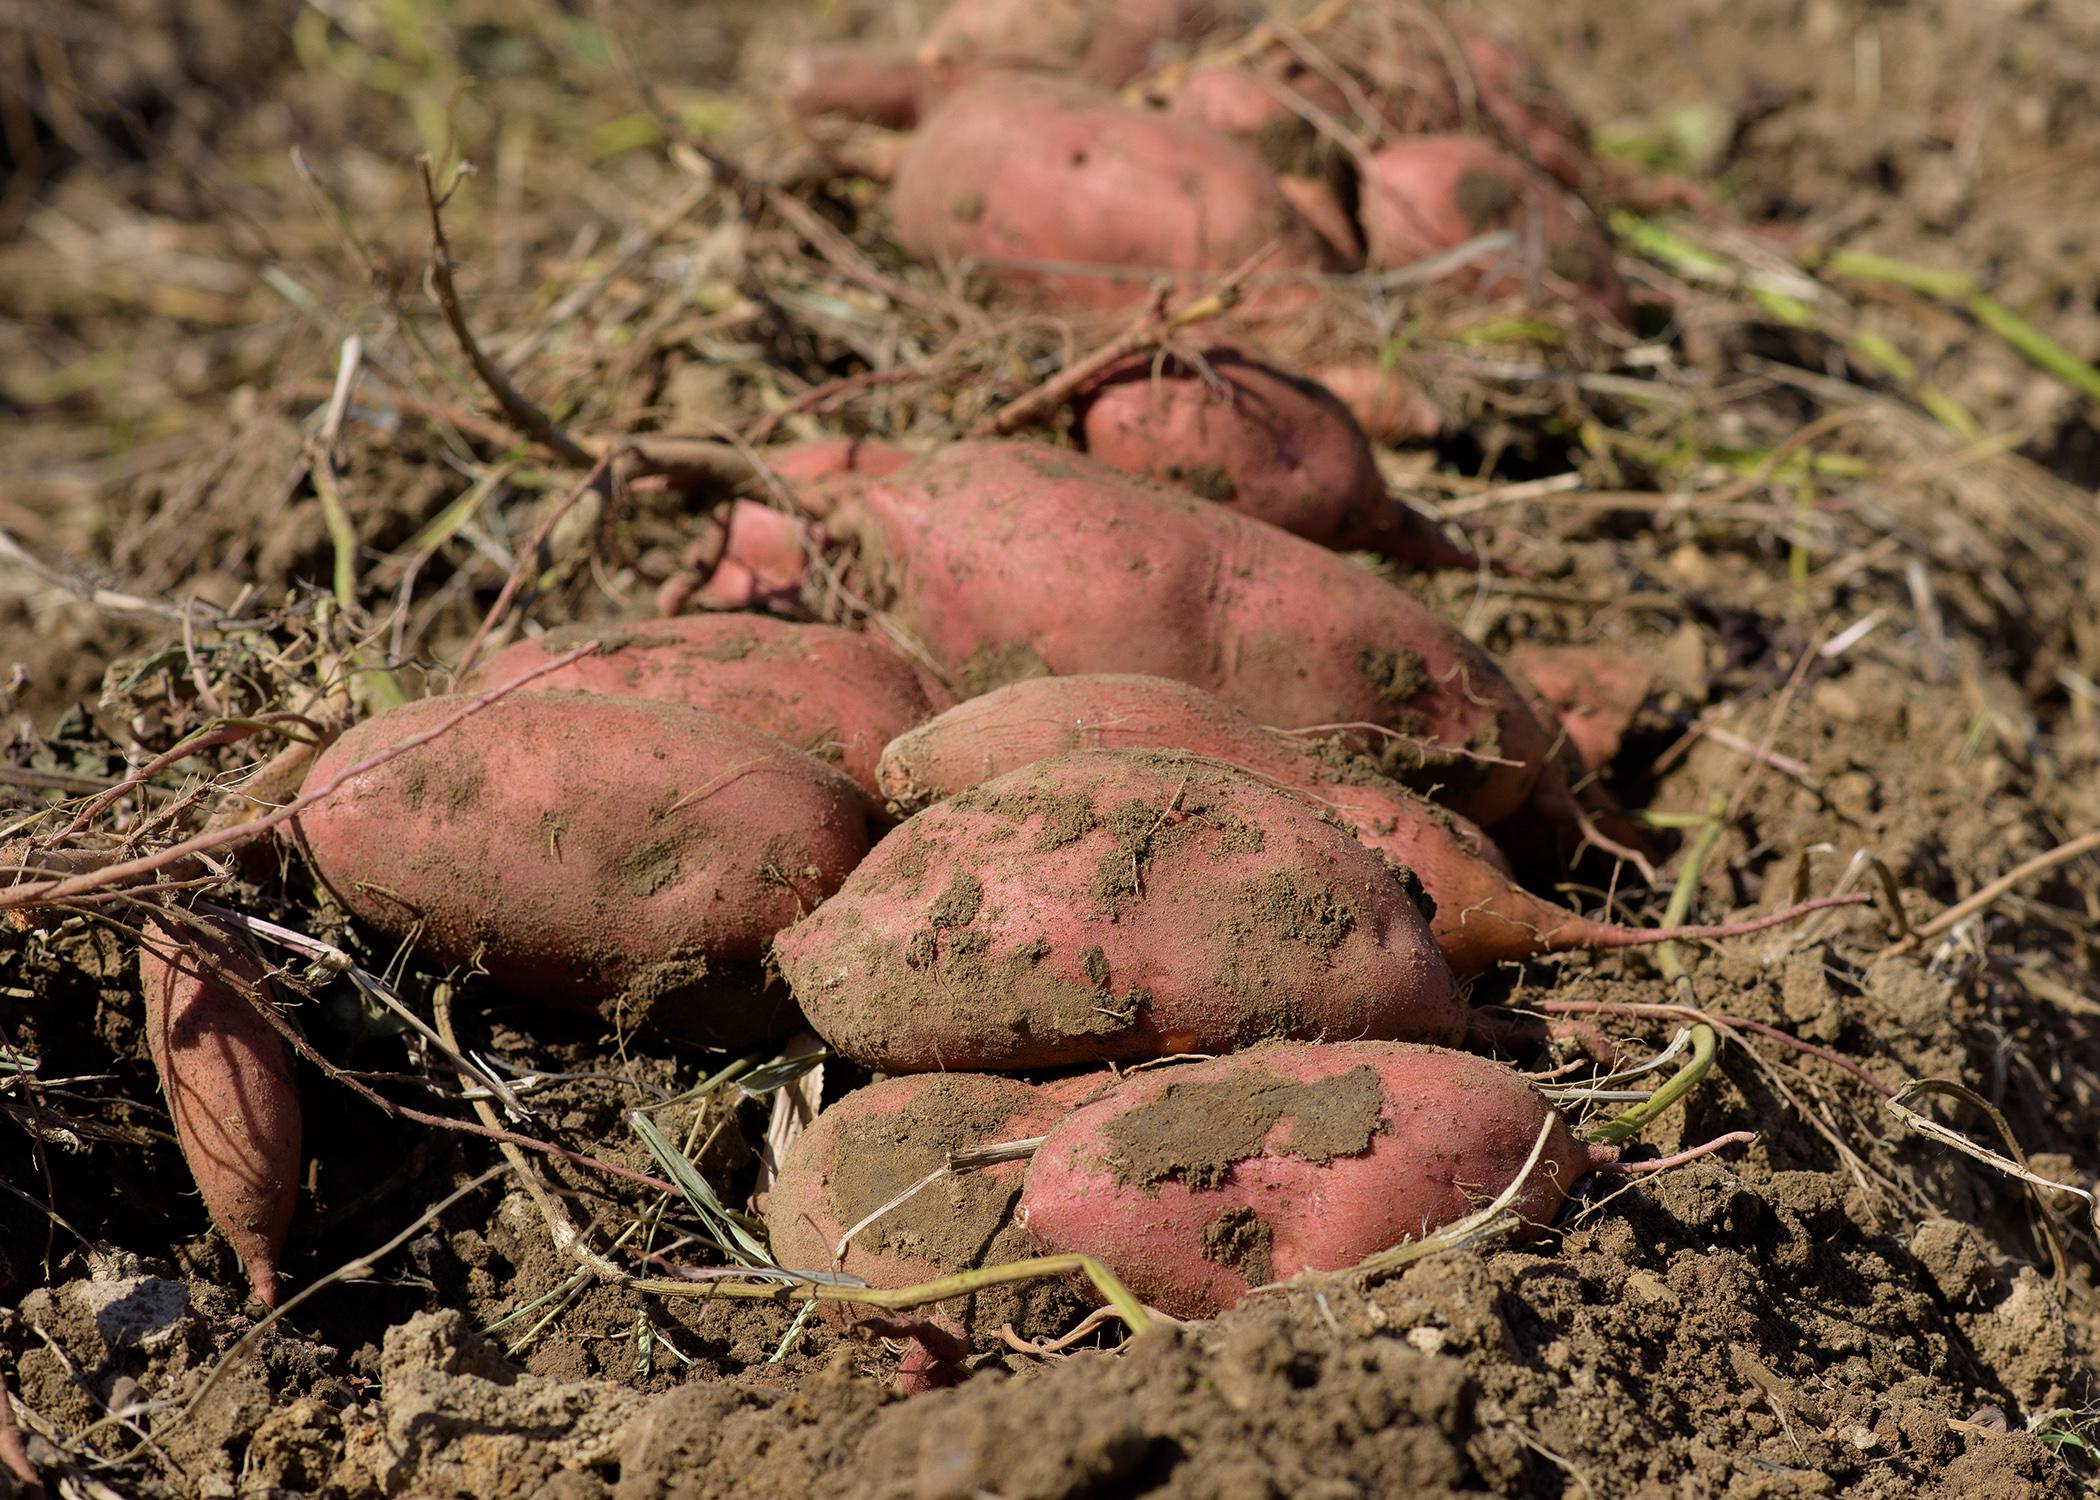 A close-up photo of a pile of sweet potatoes.